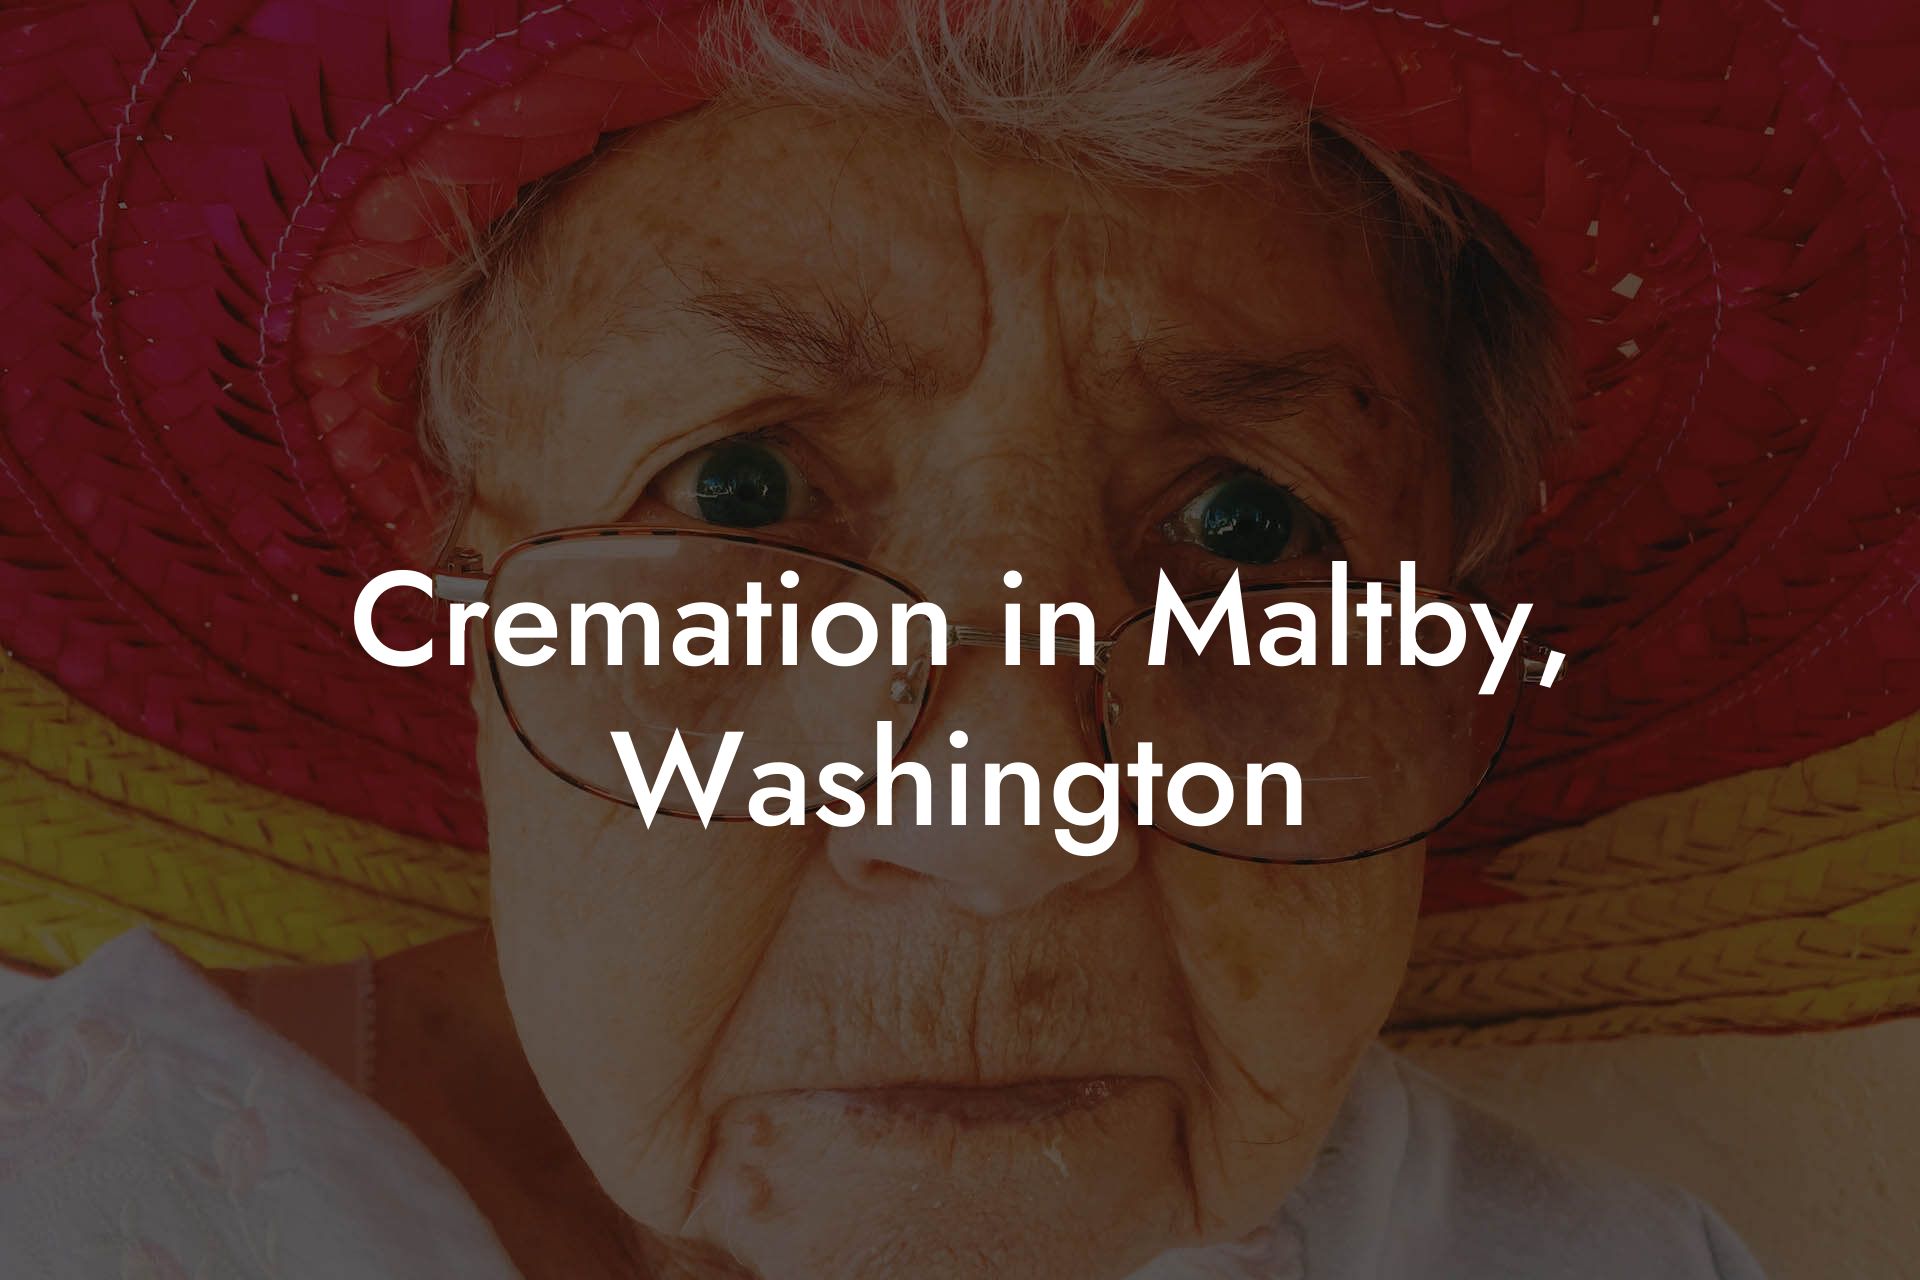 Cremation in Maltby, Washington